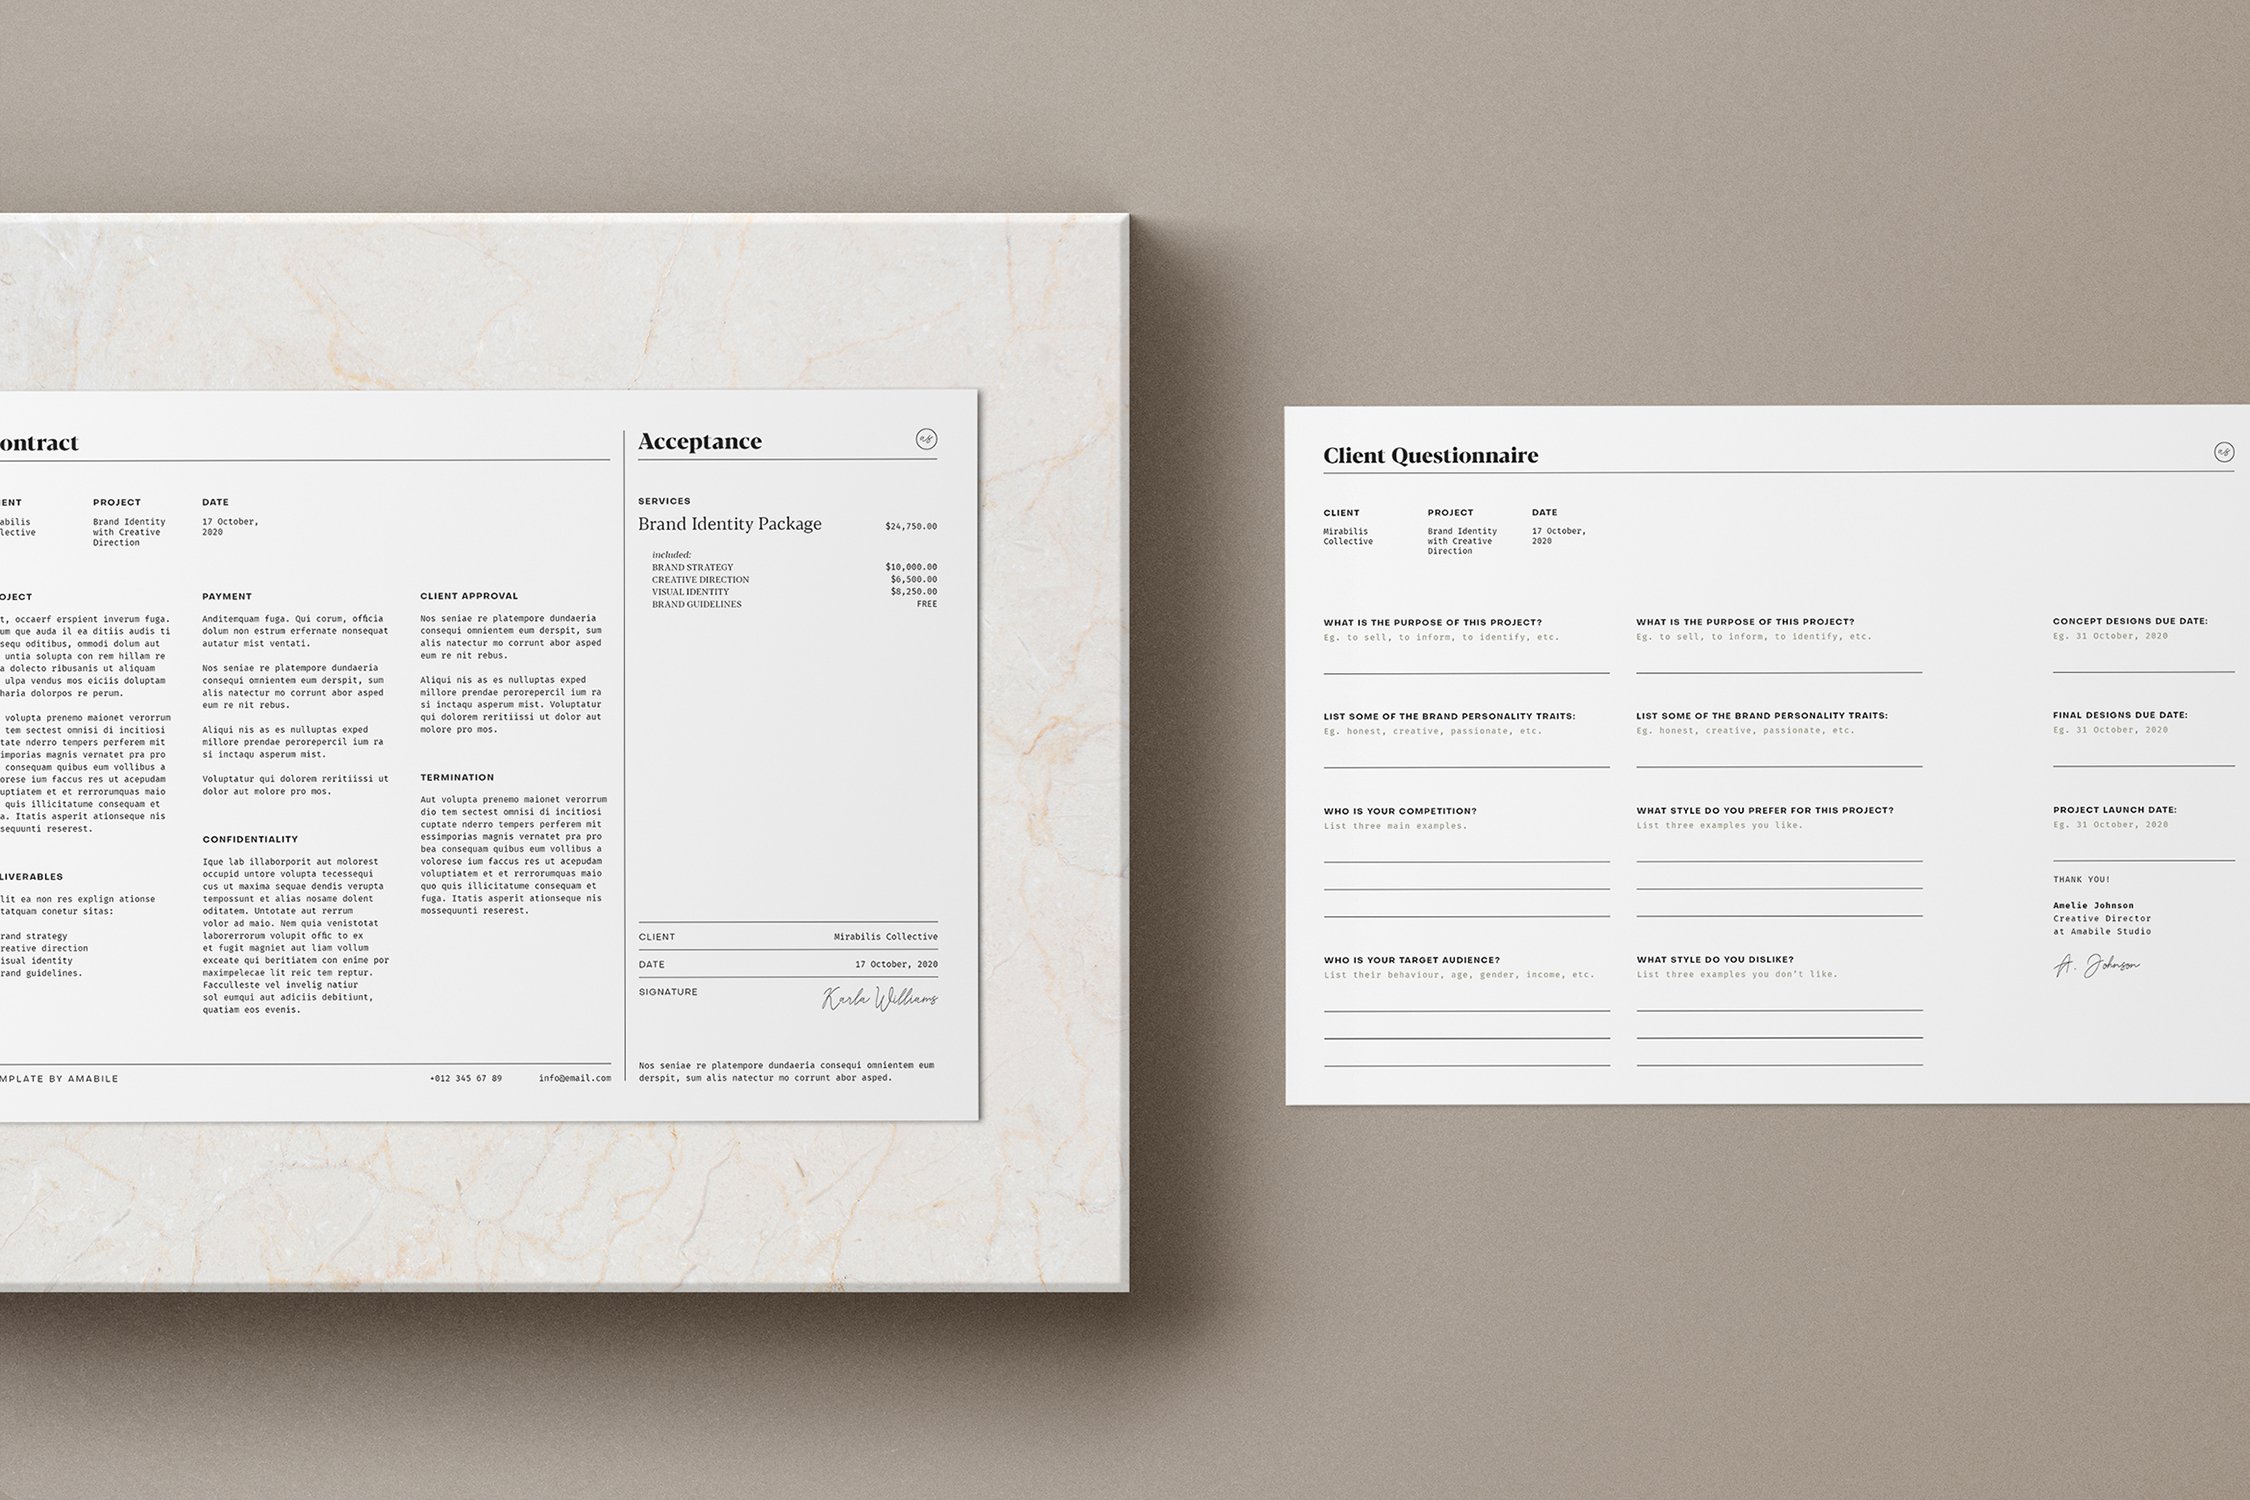 Invoice / Brief / Contract preview image.